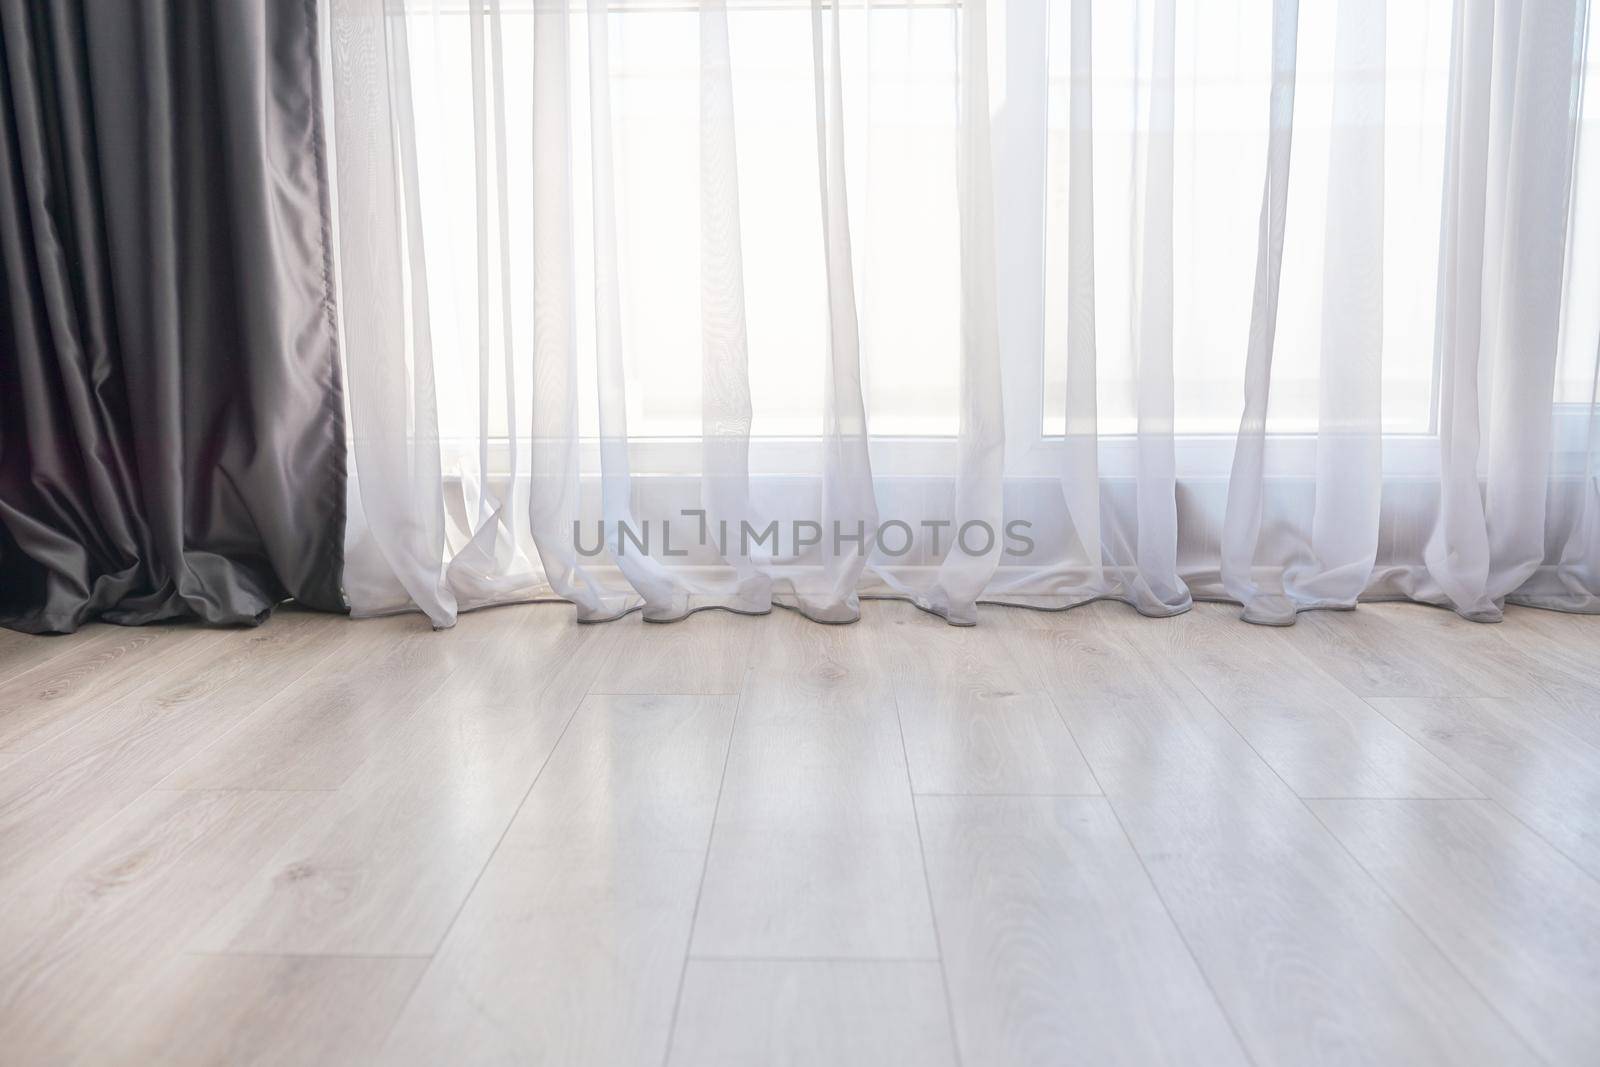 Window curtains, wood floor, interior, background Abstract image copy space